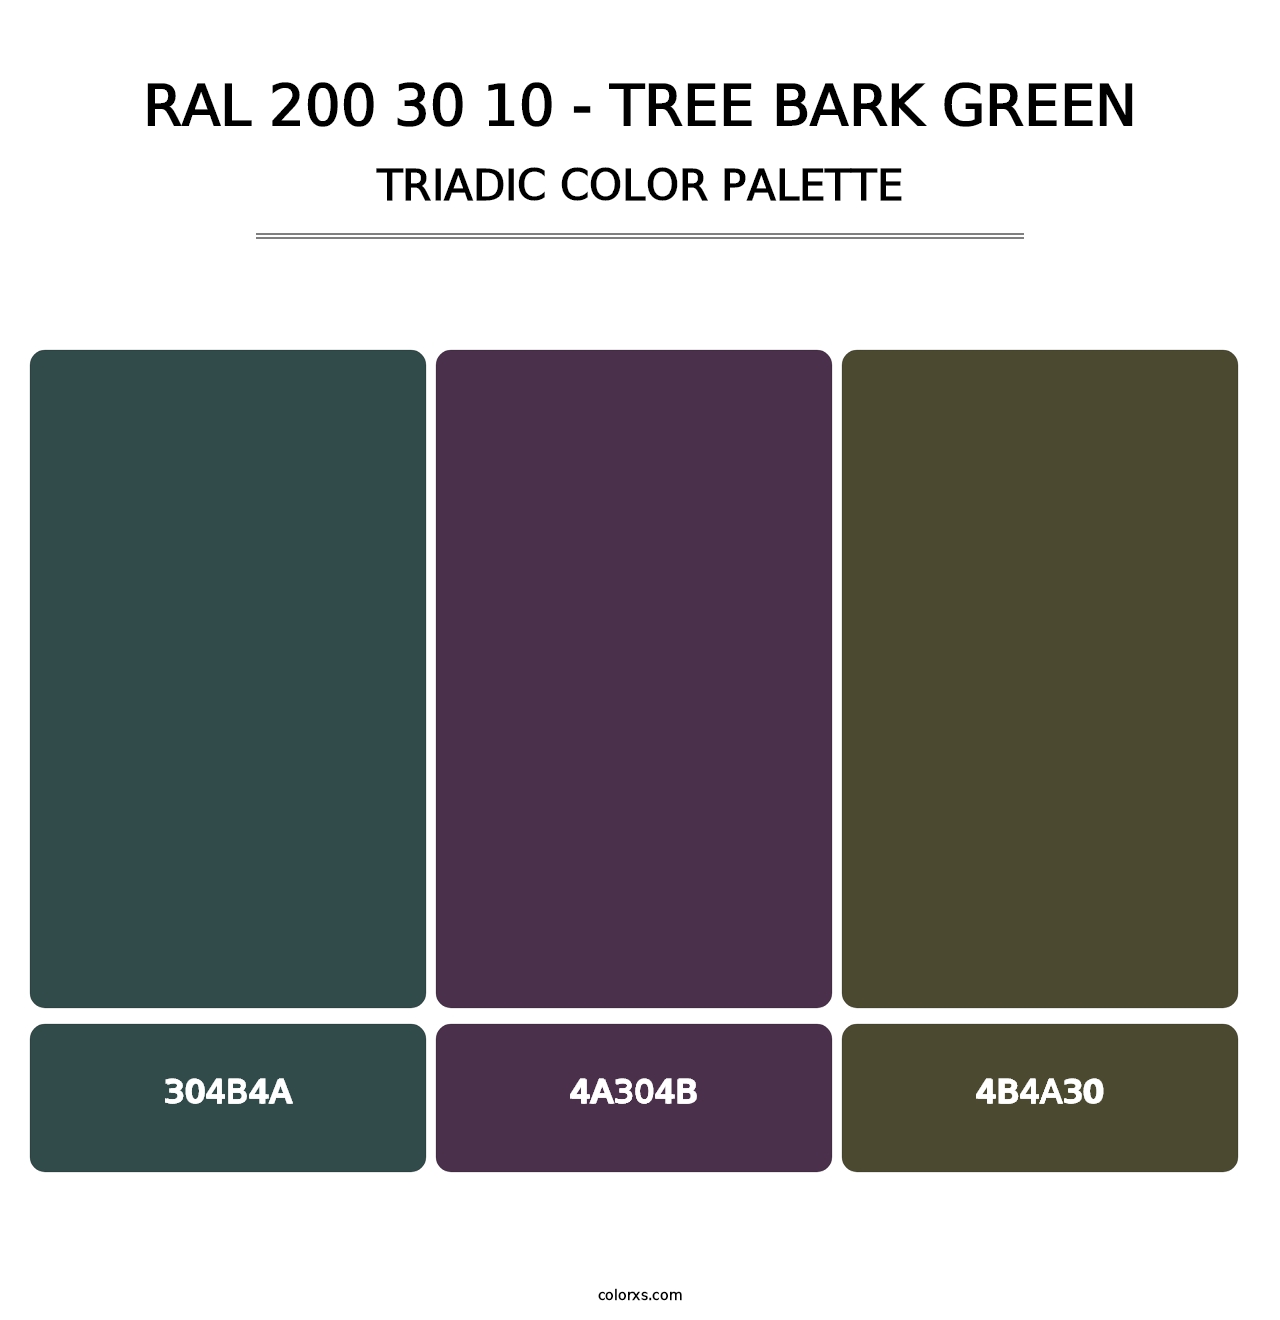 RAL 200 30 10 - Tree Bark Green - Triadic Color Palette